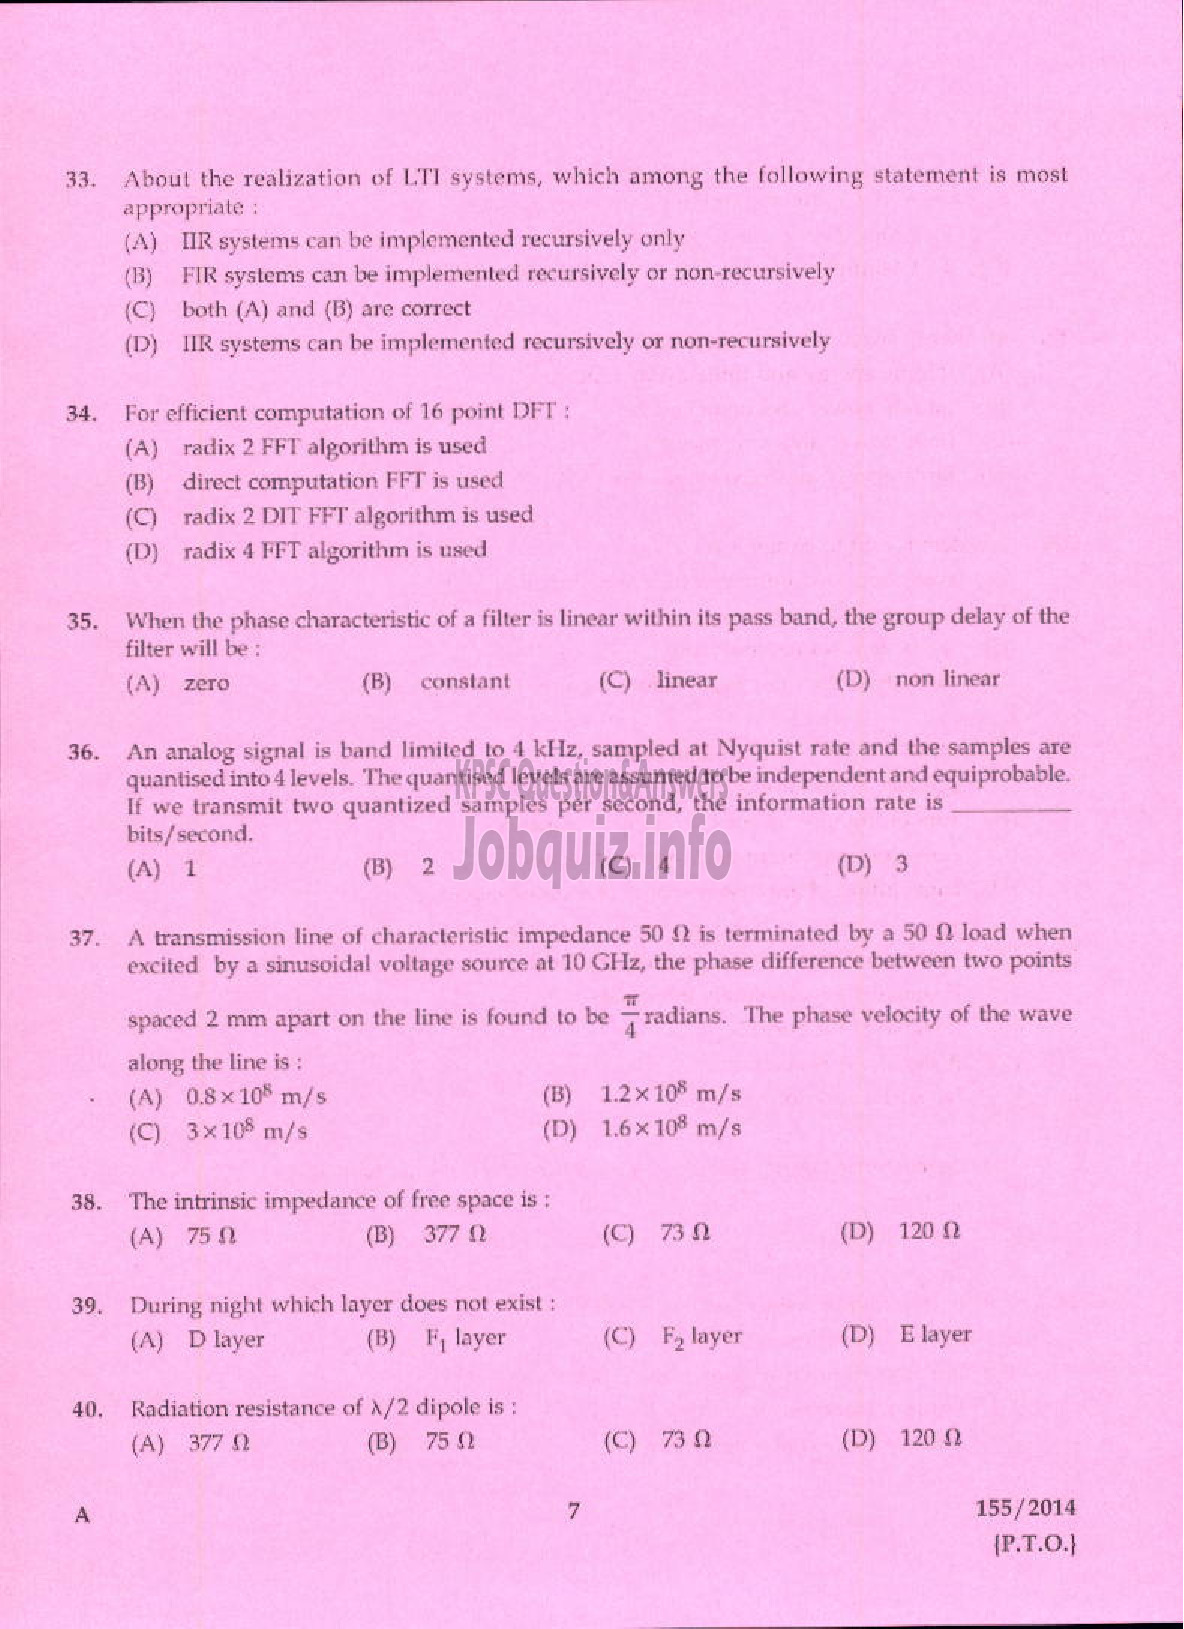 Kerala PSC Question Paper - INSTRUCTOR GR I ELECTRONICS ENGINEERING COLLEGES TECHNICAL EDUCATION-5